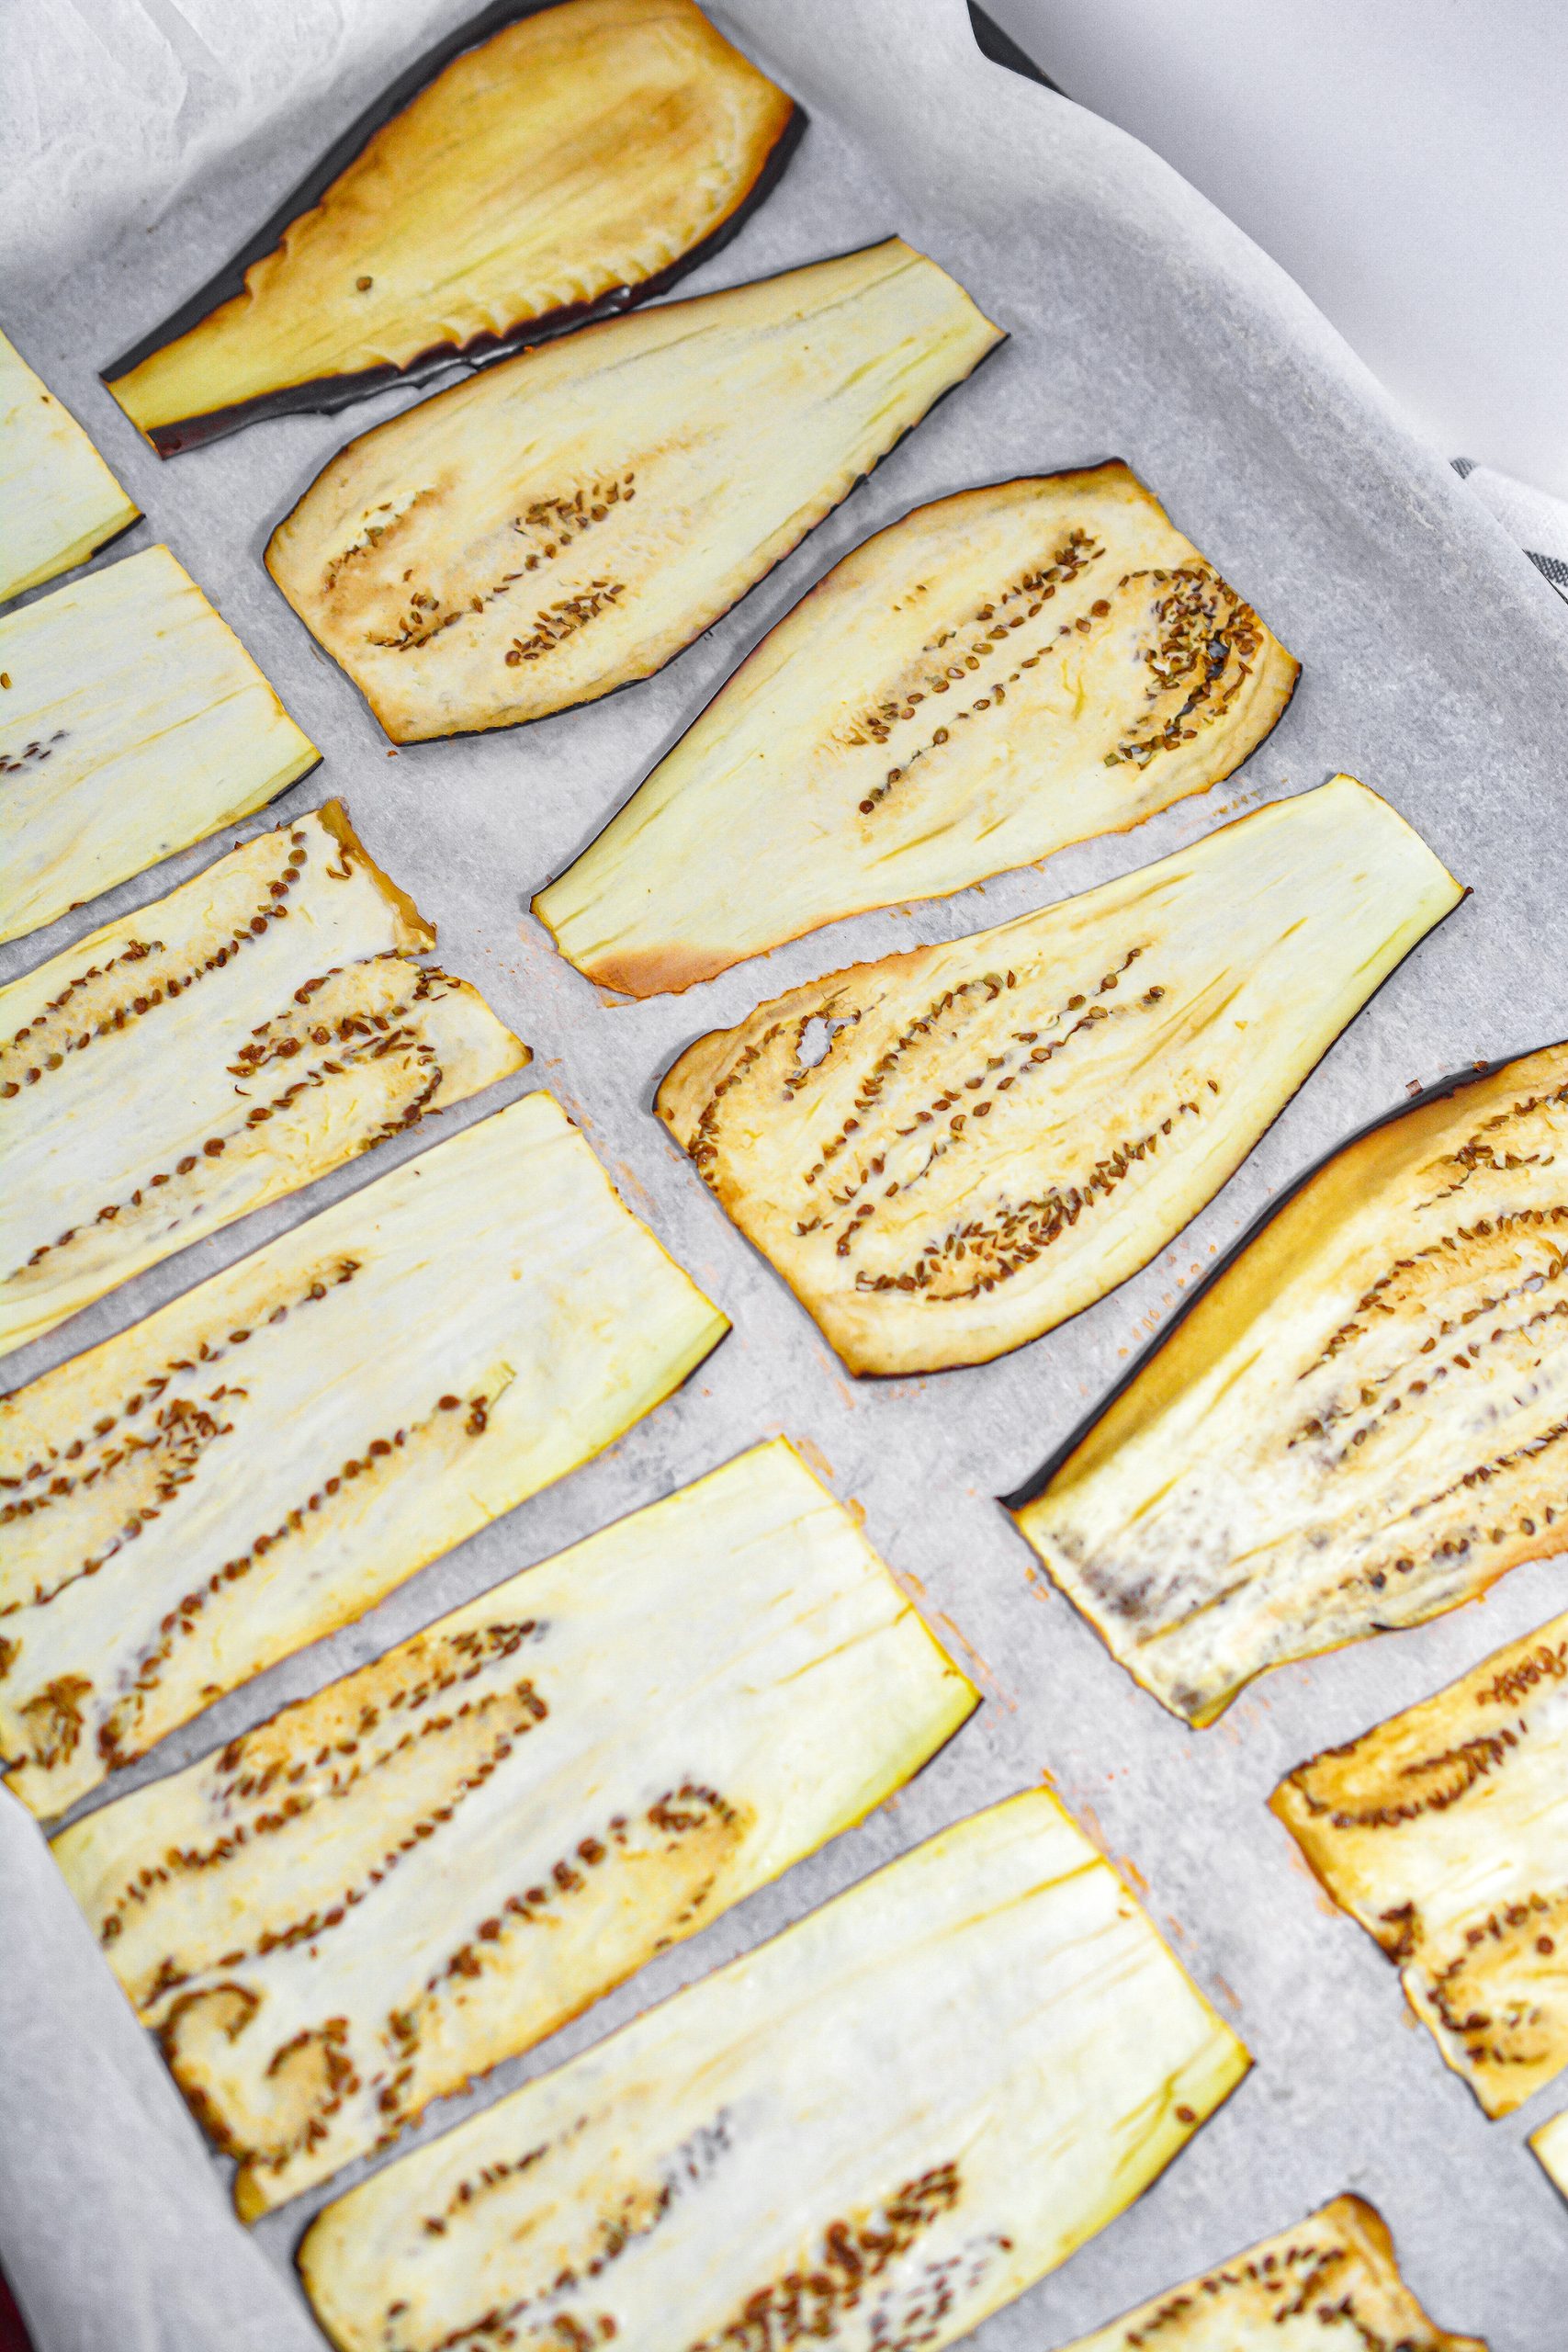  Place the eggplant on a parchment-lined baking sheet and bake for 10 minutes. 